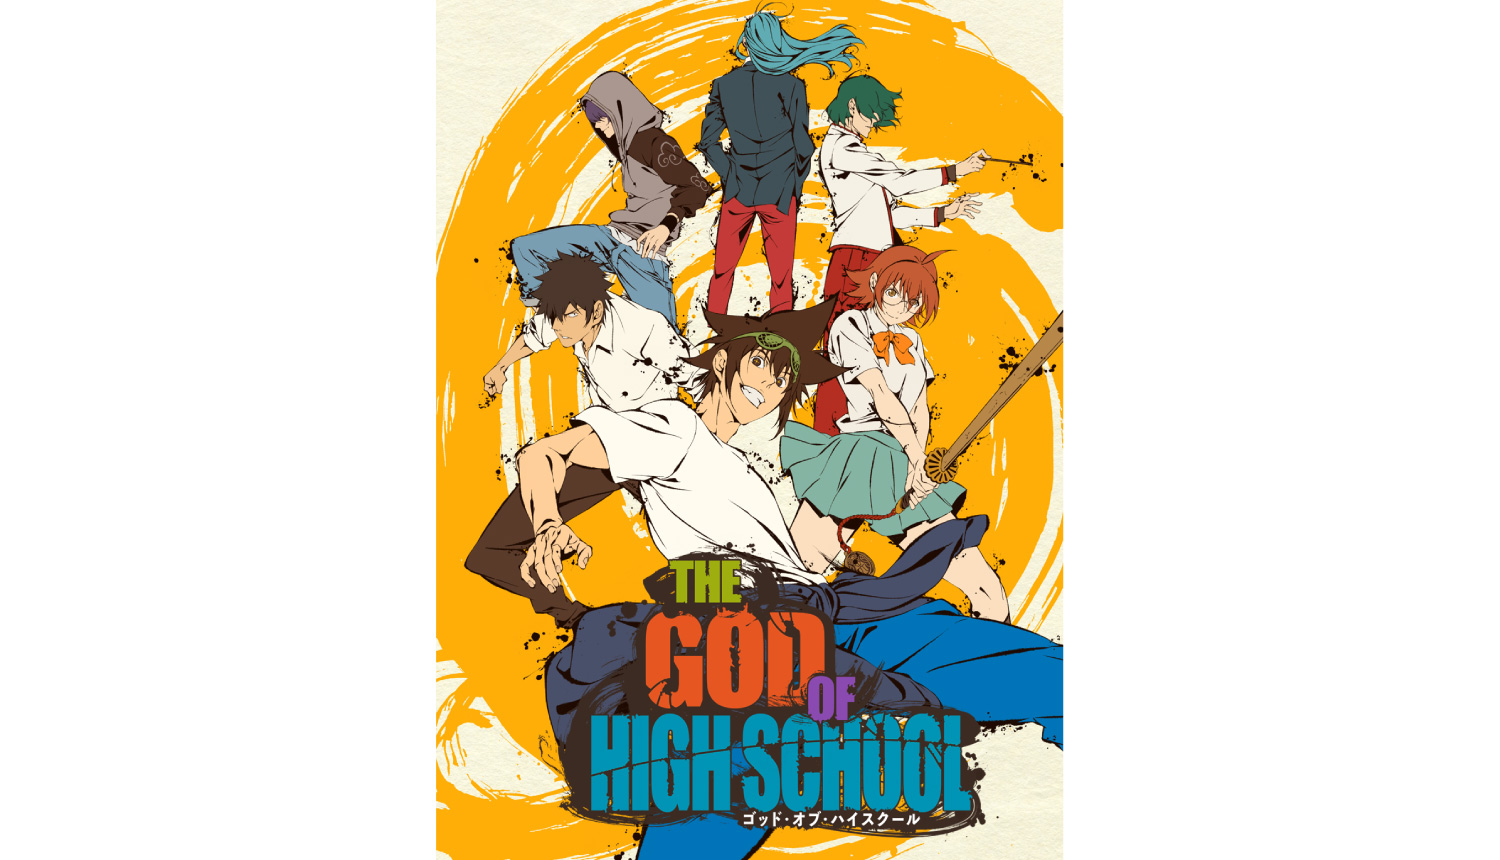 The God of High School - Official Trailer